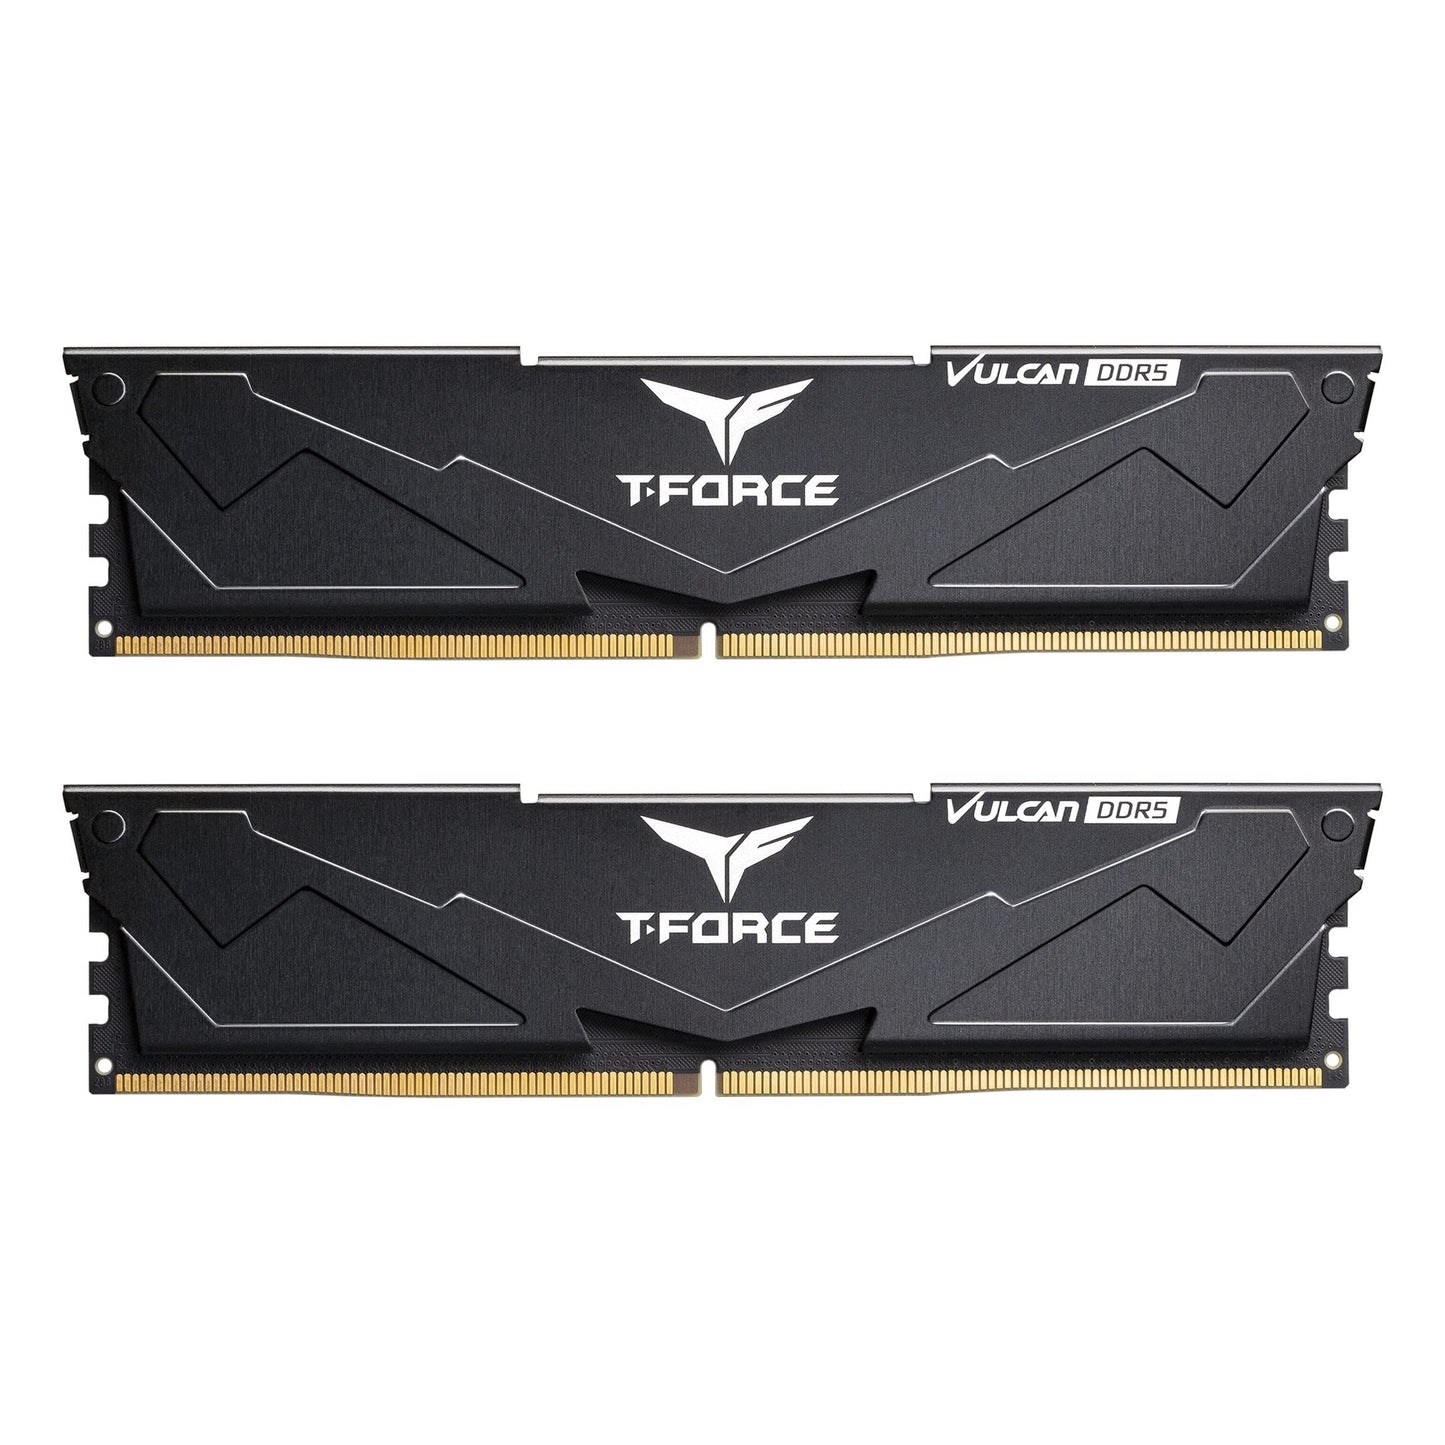 MEMORIA TEAMGROUP T-FORCE VULCAN DDR5 32GB (1 X 32GB) DDR5-5200MHZ, CL40, 1.25V - SMART BUSINESS